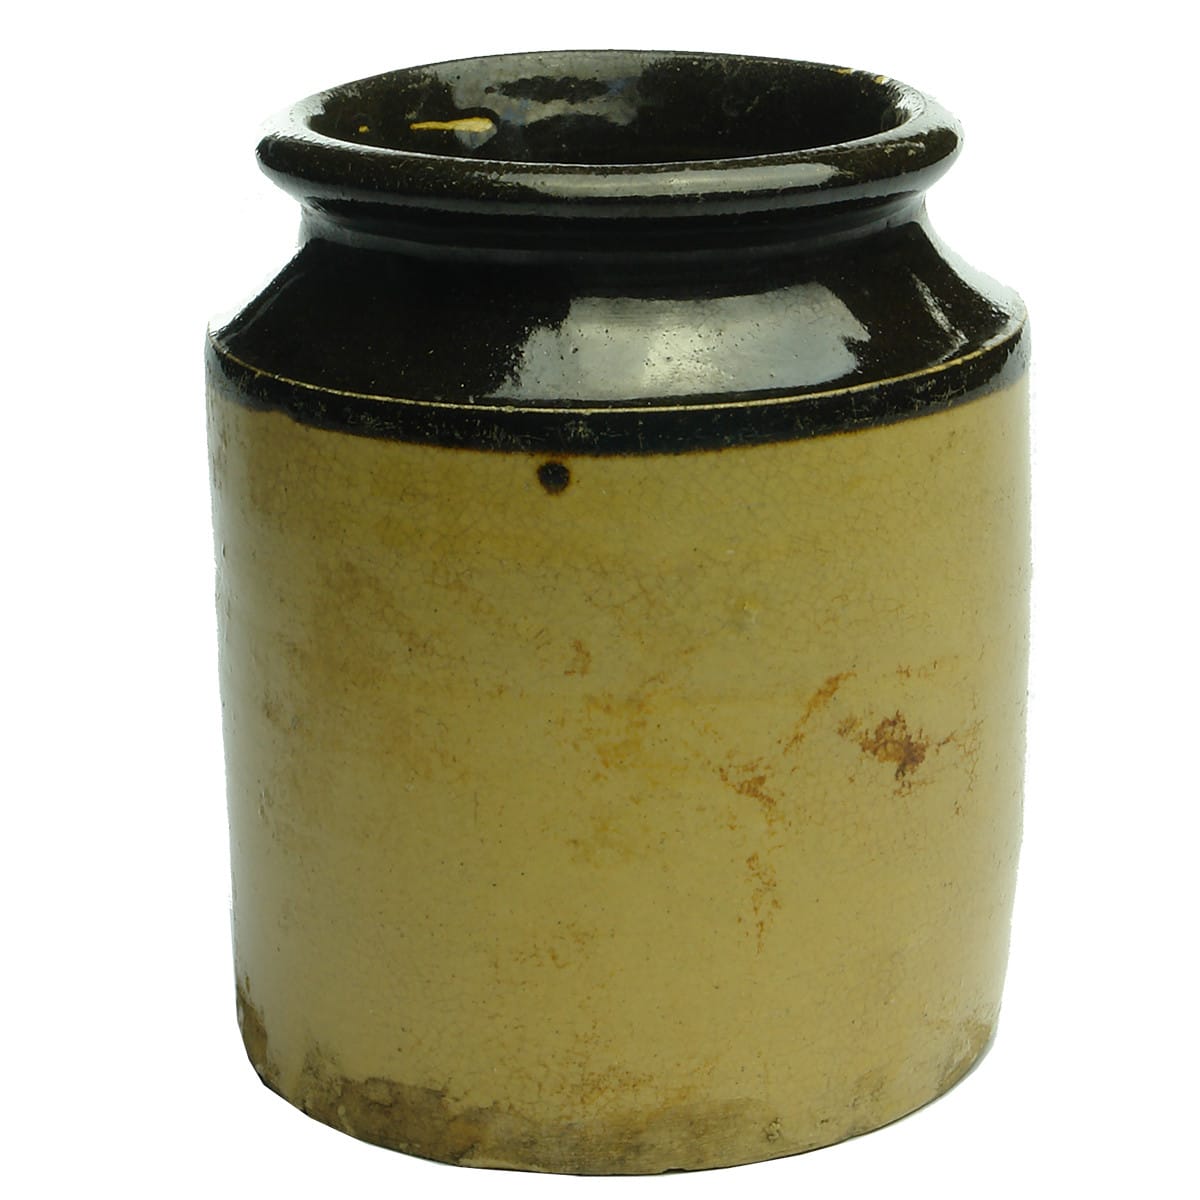 Early earthenware jar. Yellow coloured with dark chocolate top.